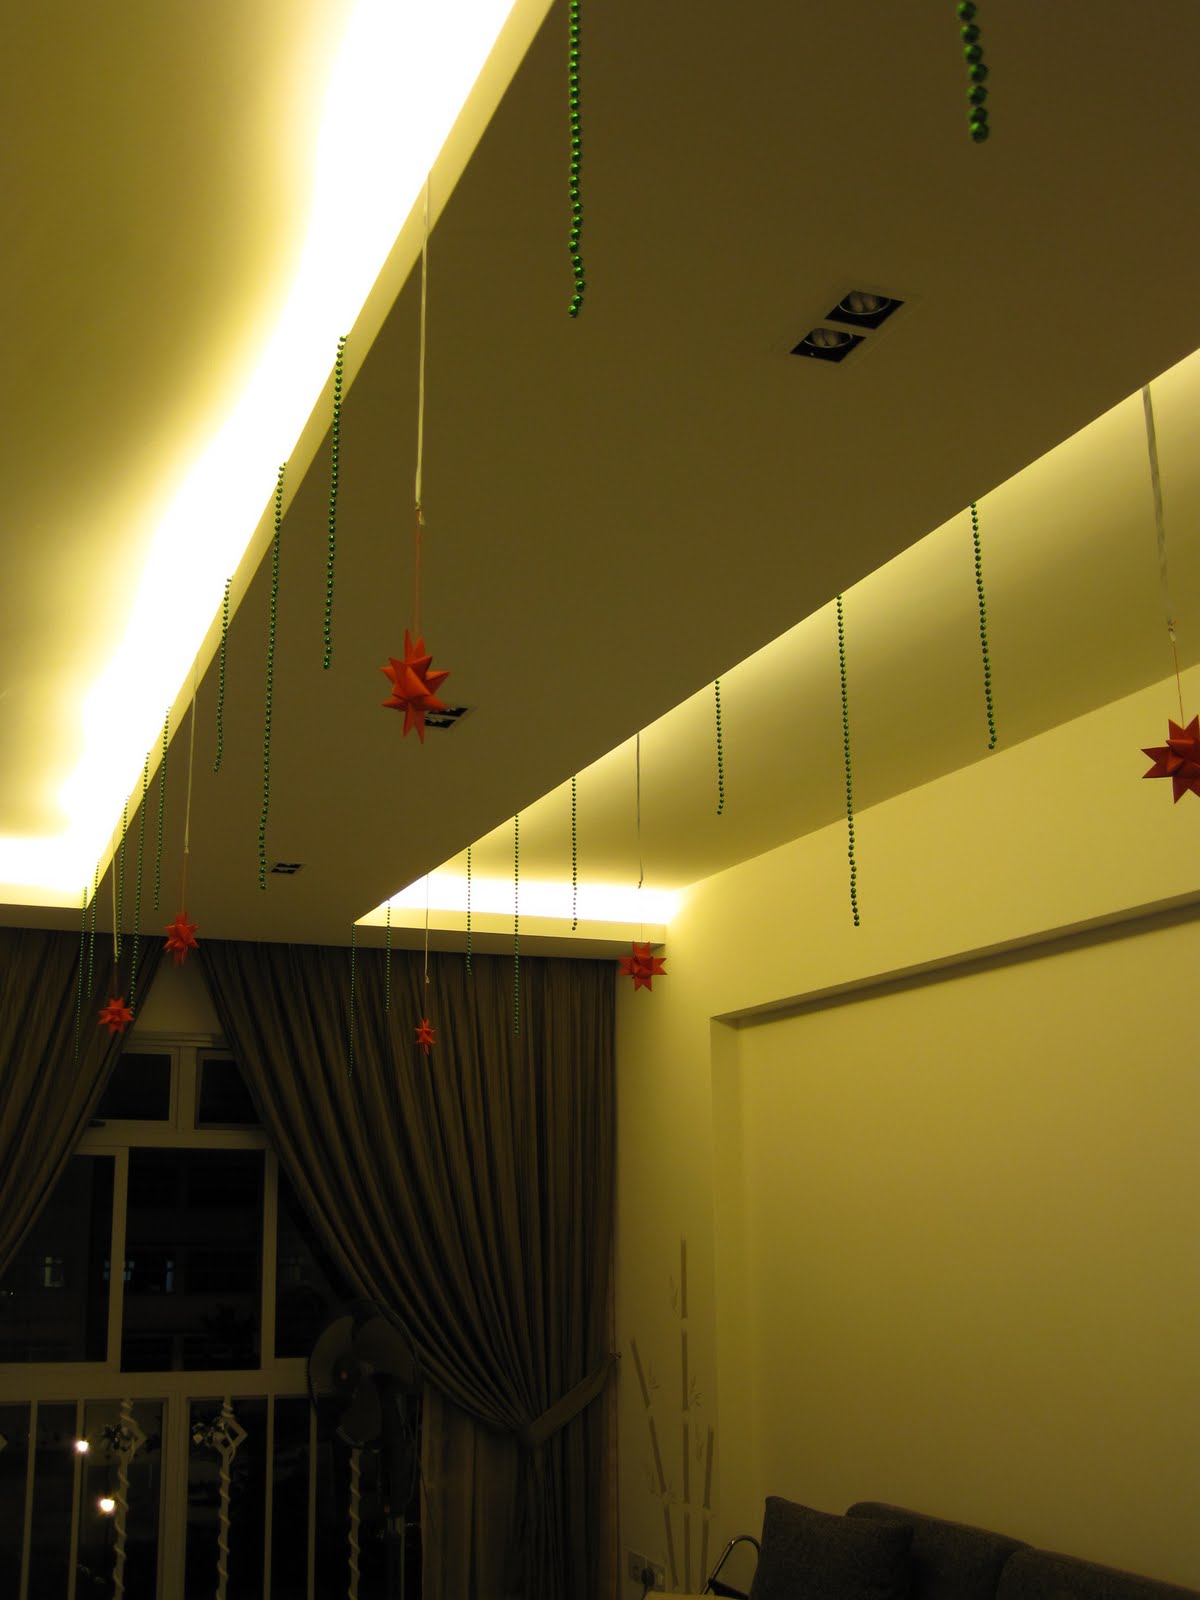 Decoration on the glass wall and the false ceiling